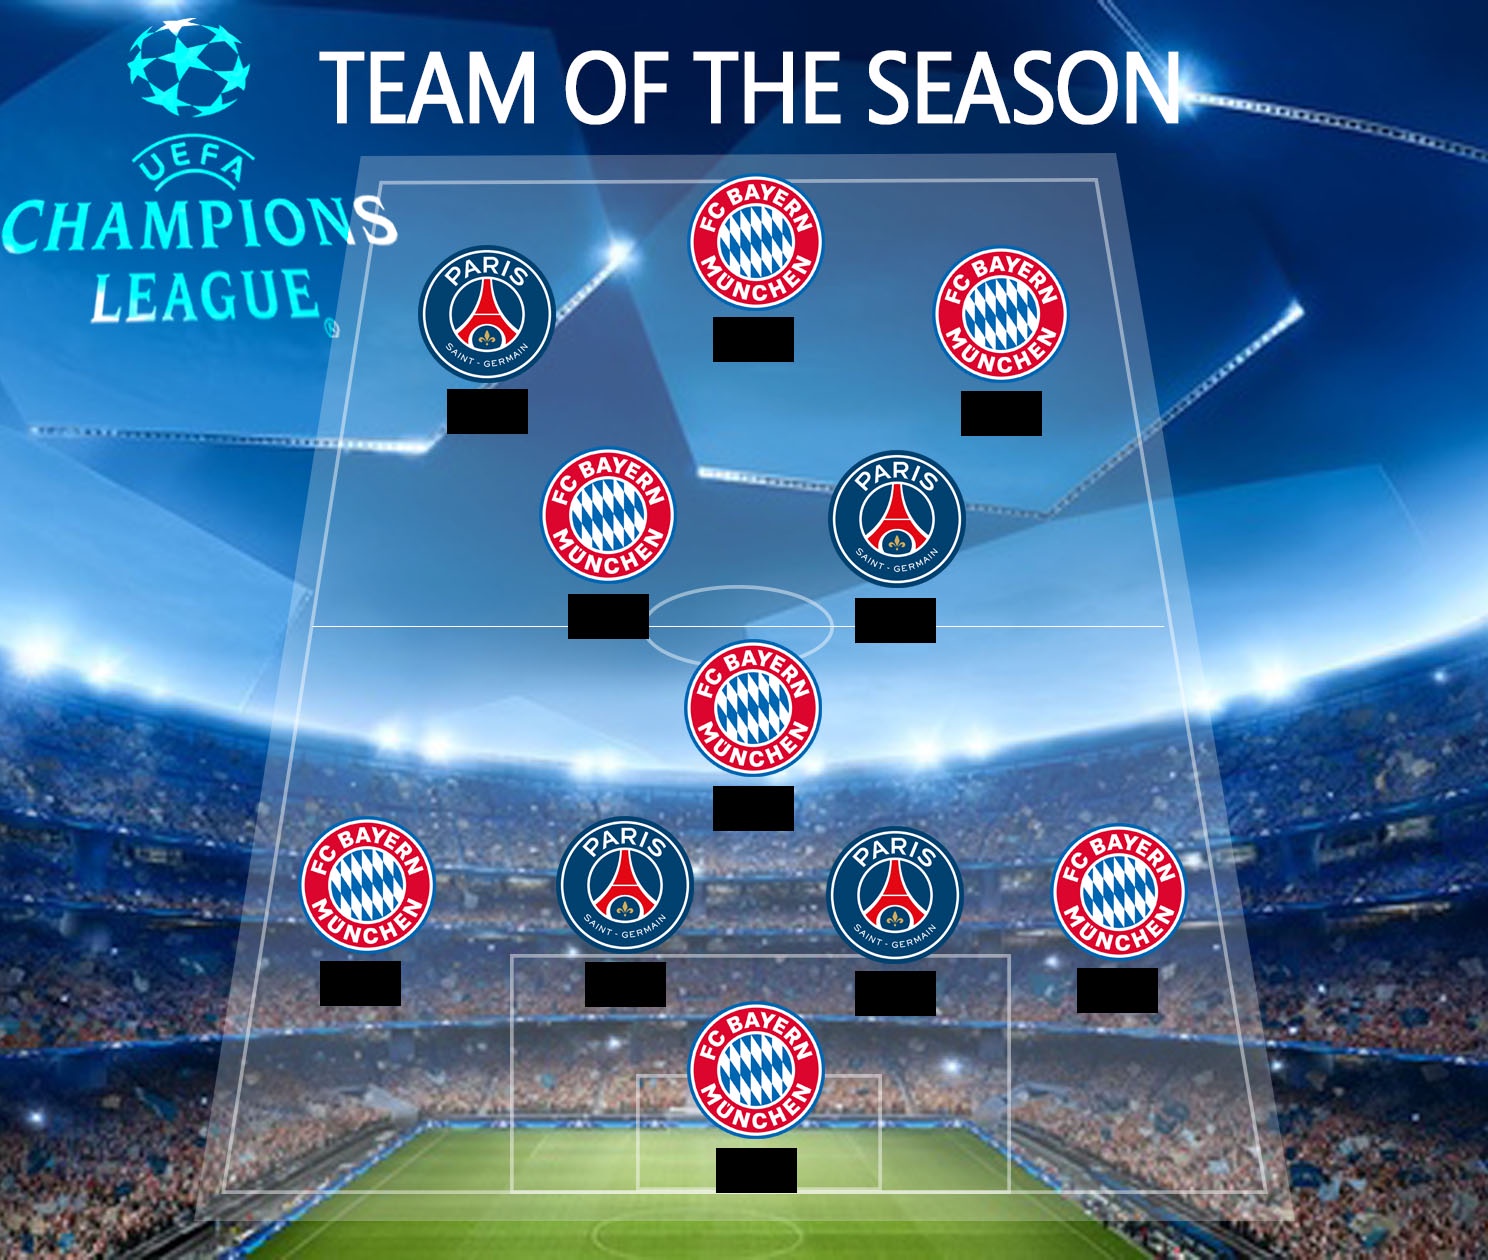 2019 to 2020 champions league teams